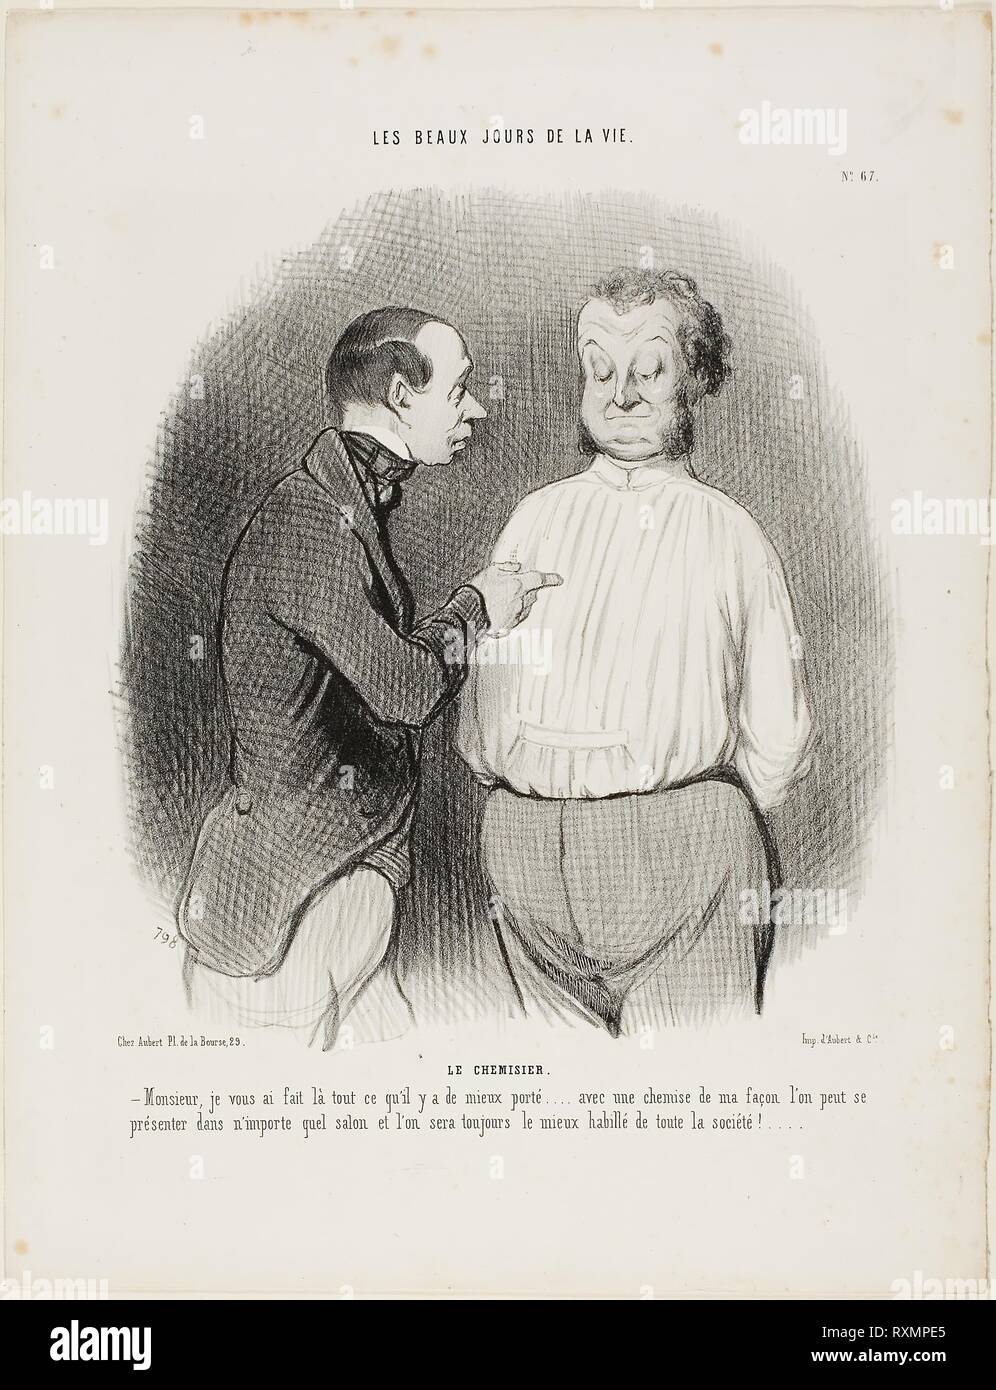 The Shirt Maker. "Sir, I have tailored here for you the best that is presently available..... with a shirt of my making one can present oneself in no matter what Salon and one will always be the best dressed man of the party," plate 67 from Les Beaux Jours De La Vie. Honoré Victorin Daumier; French, 1808-1879. Date: 1845. Dimensions: 243 × 222 mm (image); 358 × 275 mm (sheet). Lithograph in black on white wove paper. Origin: France. Museum: The Chicago Art Institute. Author: Honoré-Victorin Daumier. Stock Photo